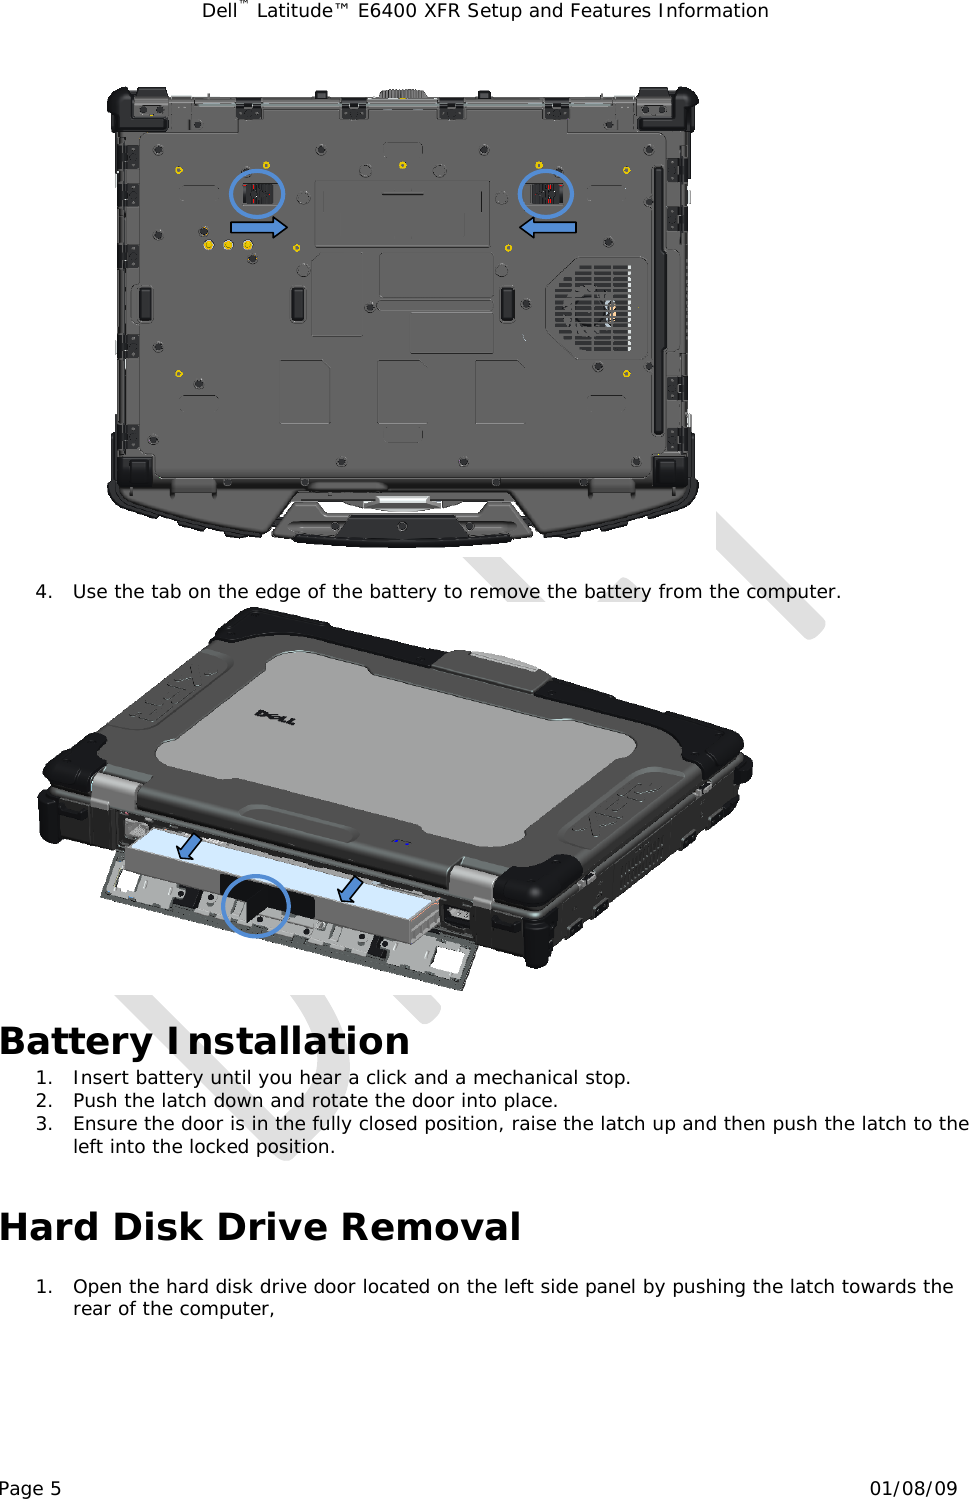 Dell™ Latitude™ E6400 XFR Setup and Features Information   Page 5                                                                                                01/08/09   4. Use the tab on the edge of the battery to remove the battery from the computer.   Battery Installation 1. Insert battery until you hear a click and a mechanical stop. 2. Push the latch down and rotate the door into place. 3. Ensure the door is in the fully closed position, raise the latch up and then push the latch to the left into the locked position.   Hard Disk Drive Removal  1. Open the hard disk drive door located on the left side panel by pushing the latch towards the rear of the computer, 